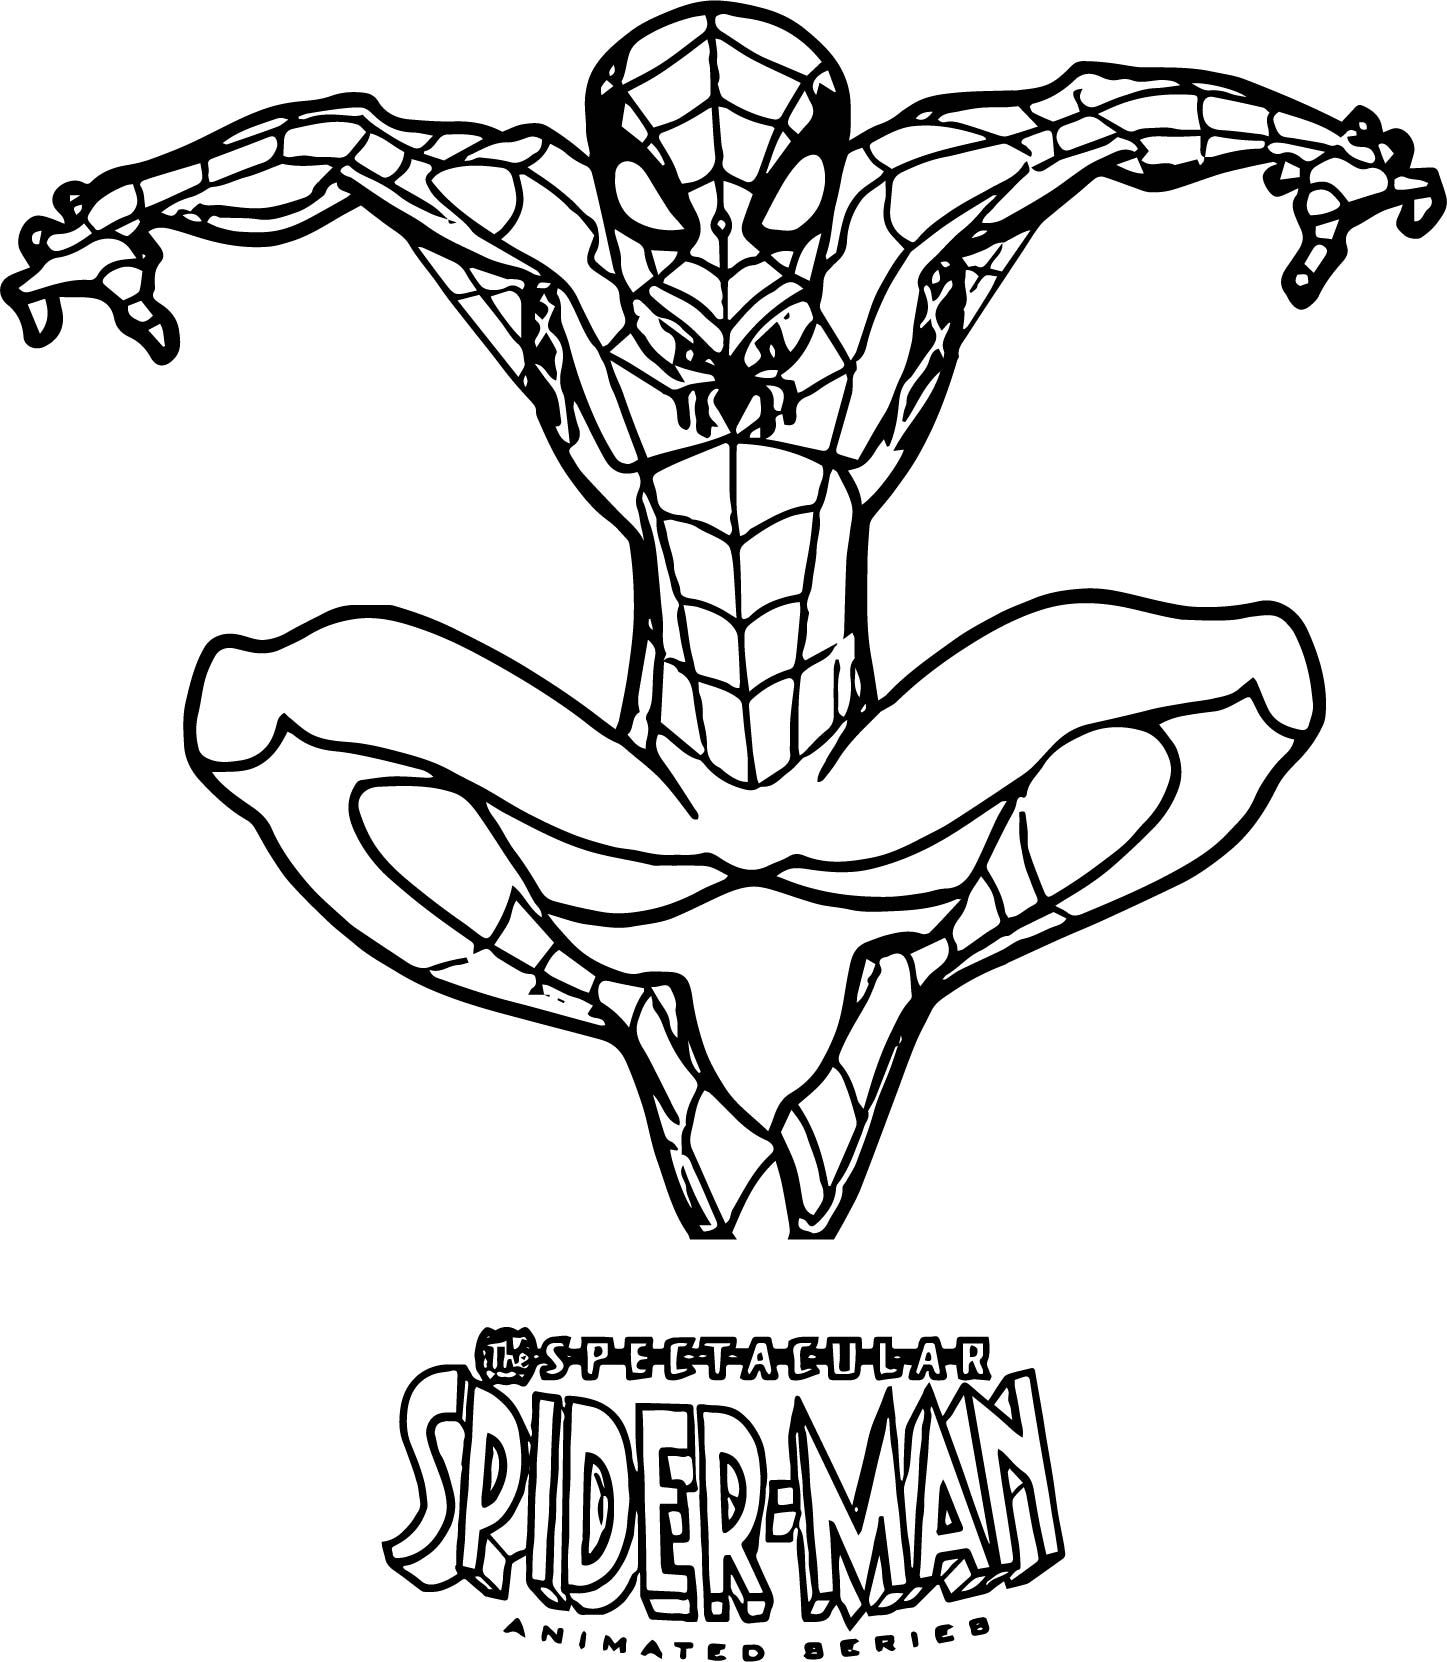 Nice Spectacular Spider Man Coloring Lego Spiderman Coloring Pages coloring  pages lego spiderman coloring lego spiderman colouring lego spiderman  coloring sheet I trust coloring pages.